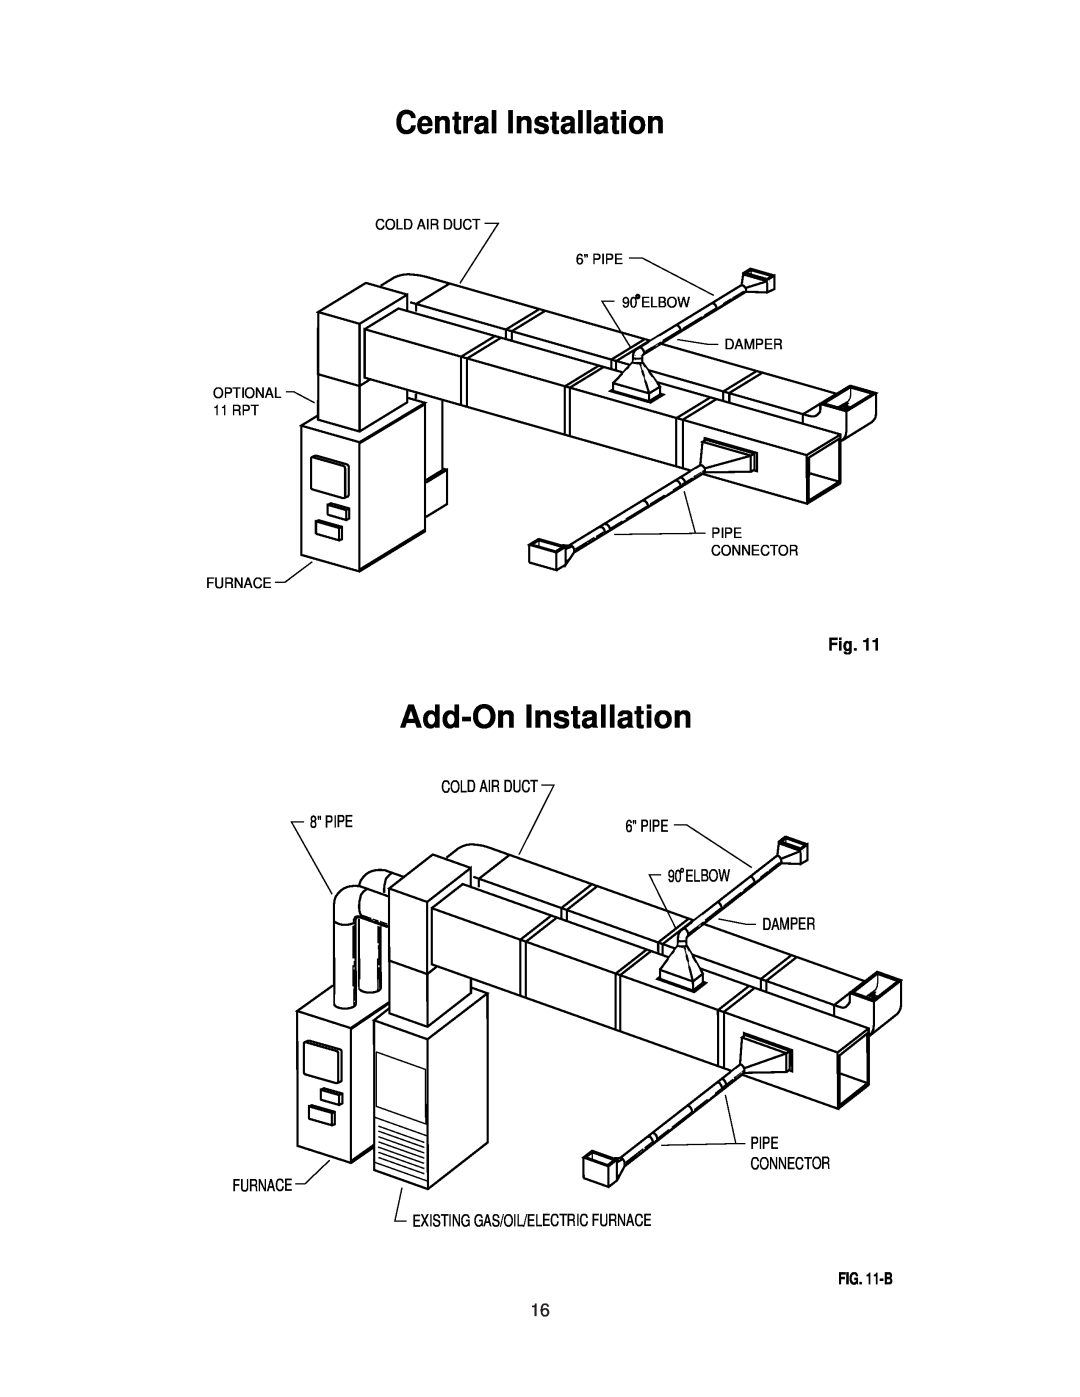 United States Stove 1321 Central Installation, Add-OnInstallation, Elbow Damper Pipe Connector Furnace, Cold Air Duct 